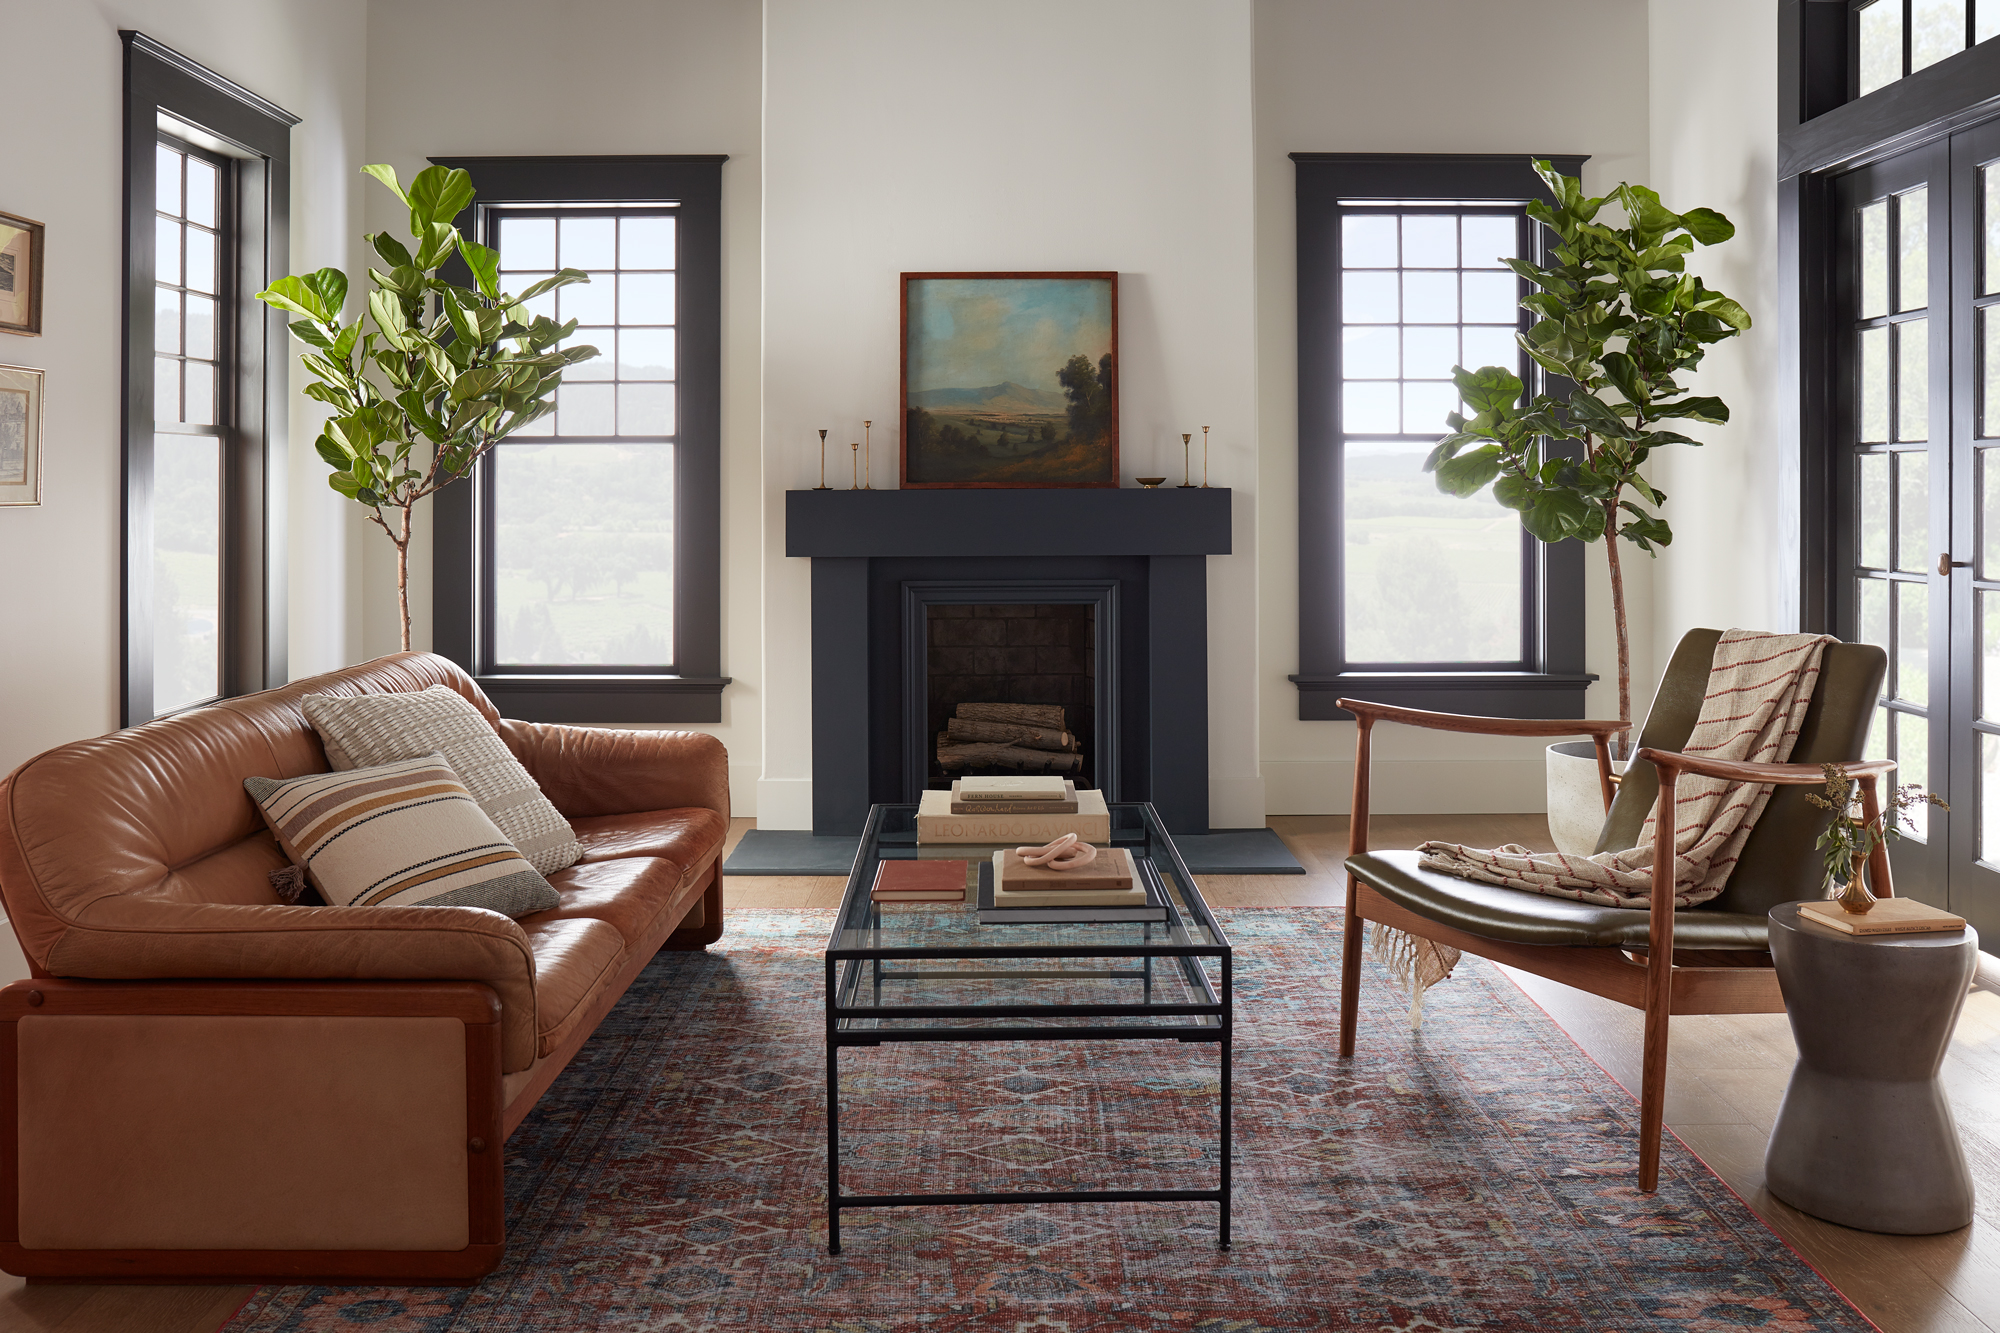 magnolia home: classic and cozy living room - the perfect finish